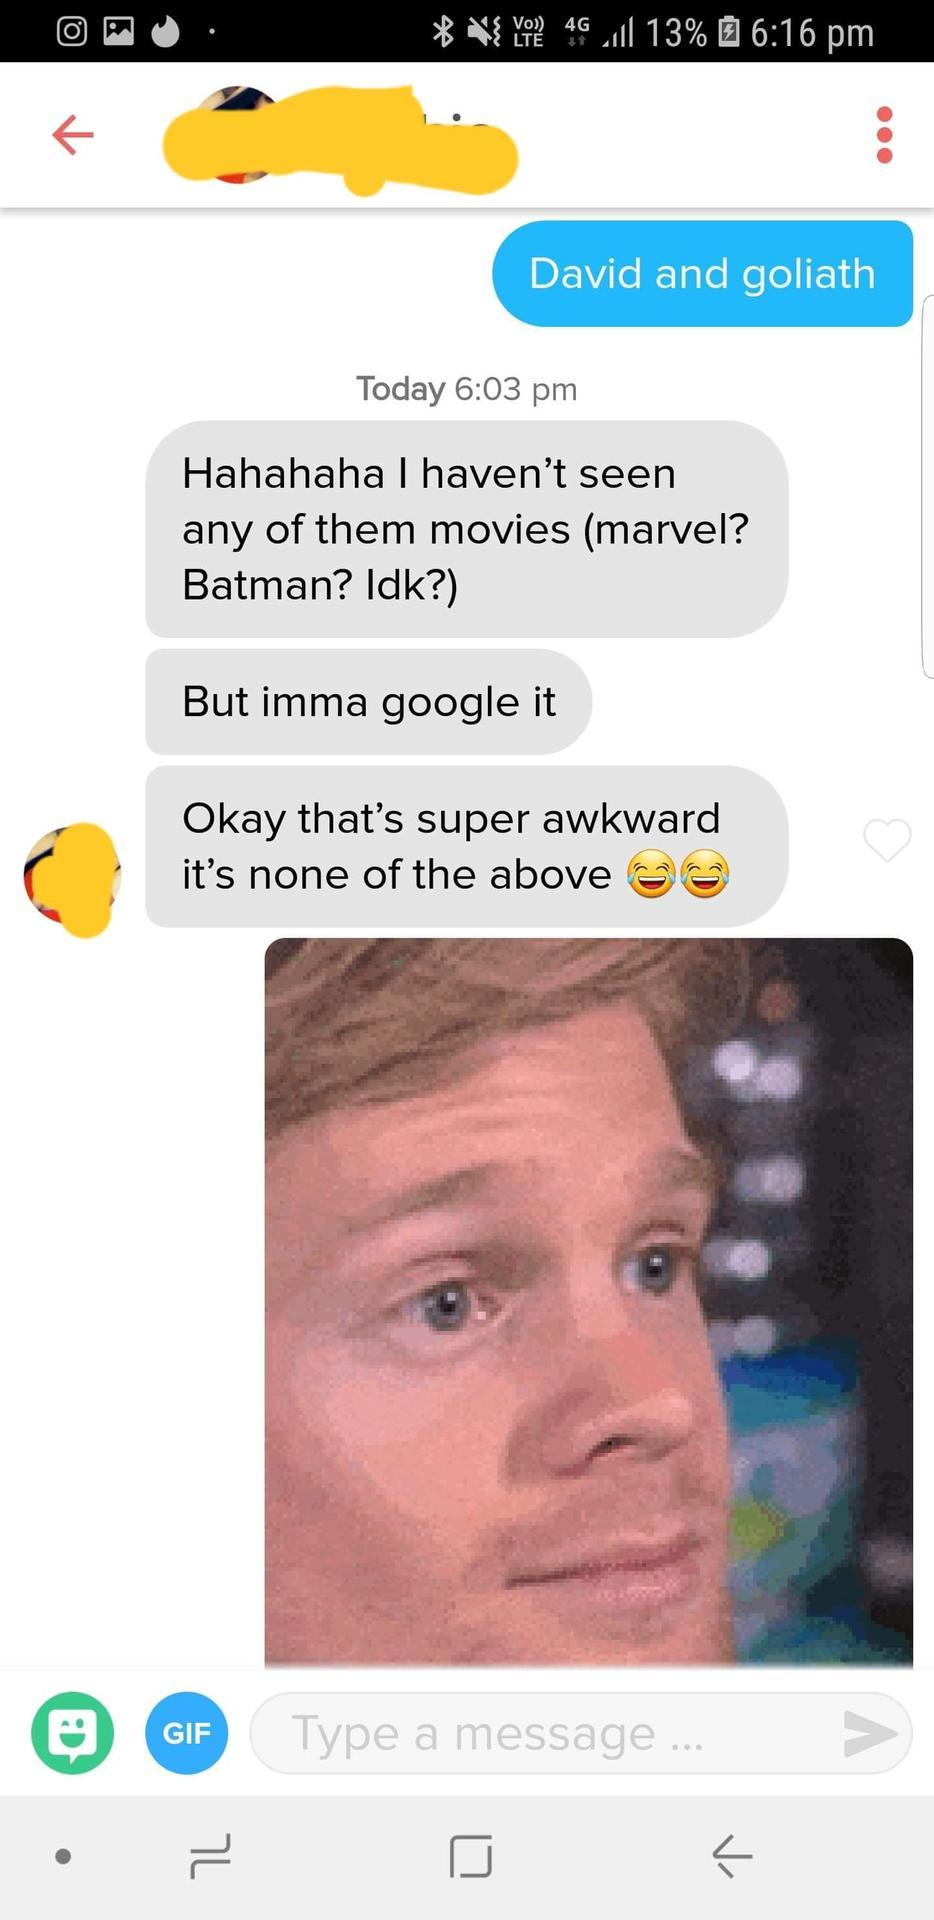 tinder - ask me if i m an airplane - Ni Yote 4G 1l 13% 6 David and goliath Today Hahahaha I haven't seen any of them movies marvel? Batman? Idk? But imma google it Okay that's super awkward it's none of the above Gif Gif Type a message ... >